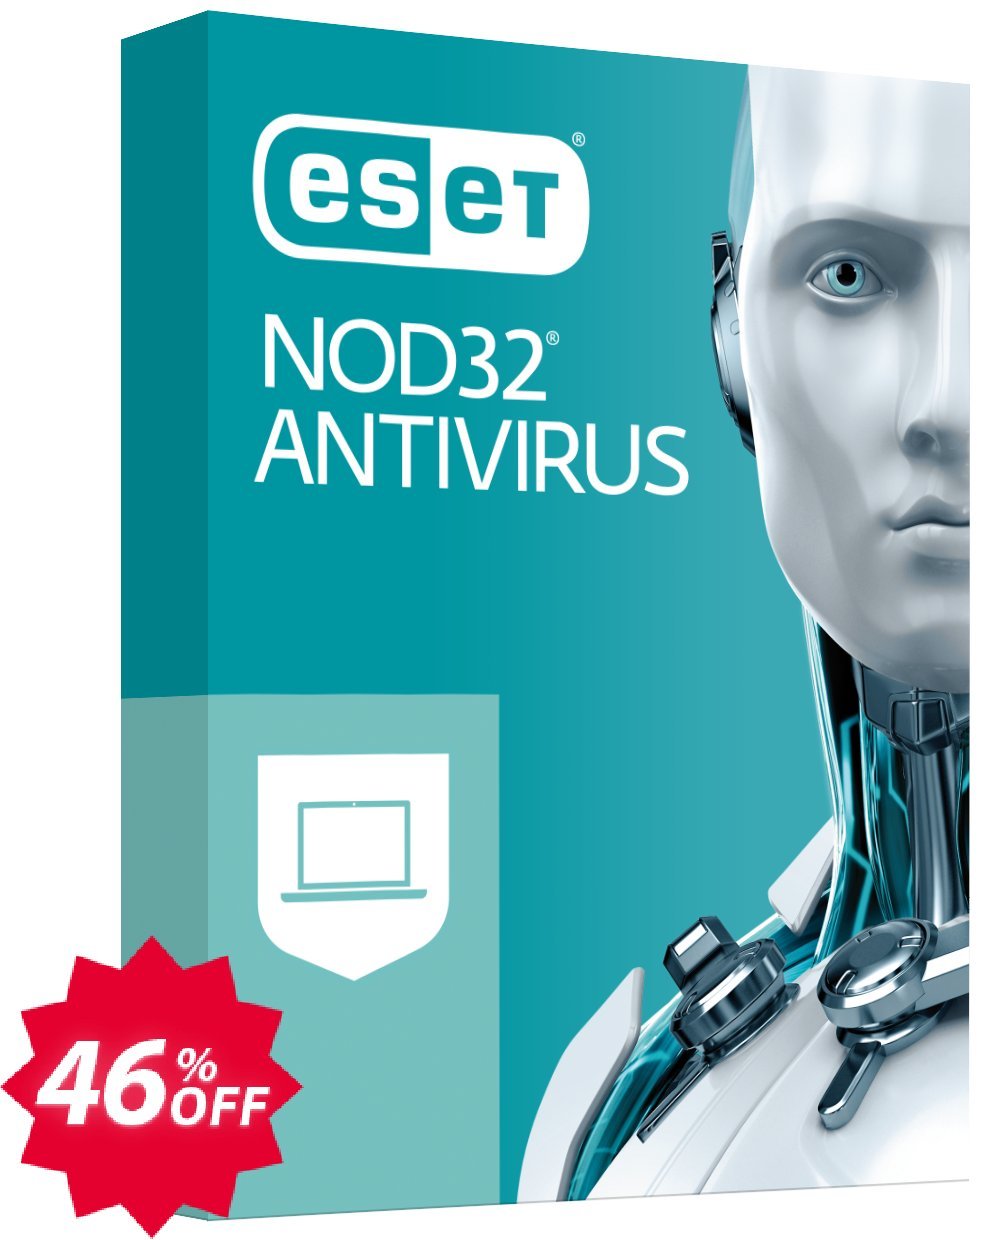 ESET NOD32 Antivirus - Renew Yearly 3 Devices Coupon code 46% discount 